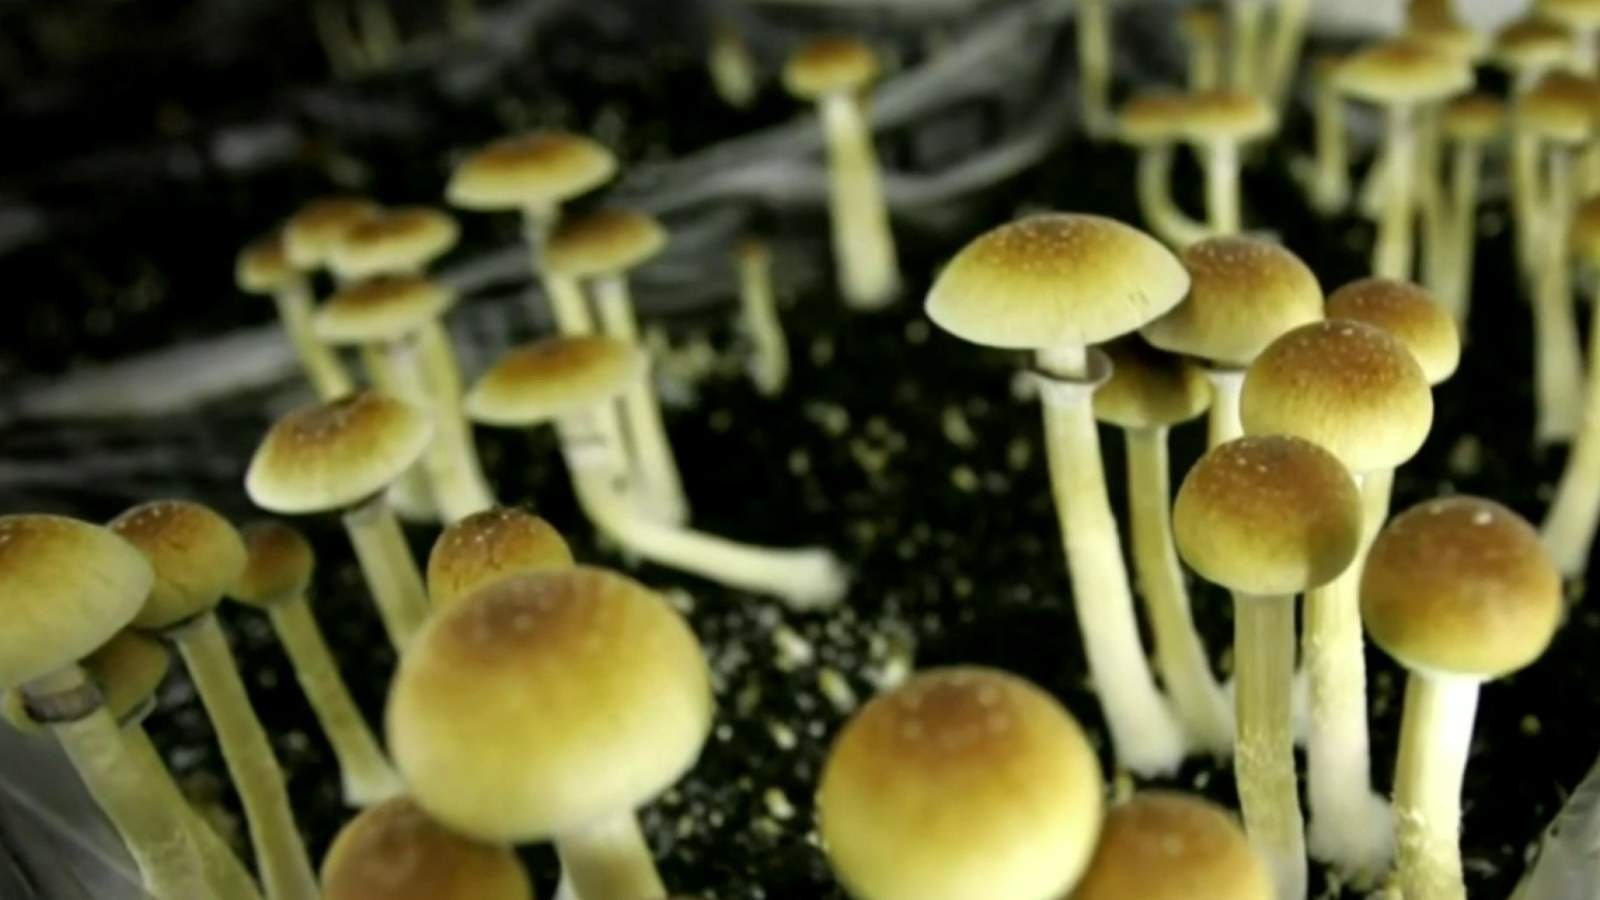 City Council votes to make psychedelic mushrooms legal in Ann Arbor